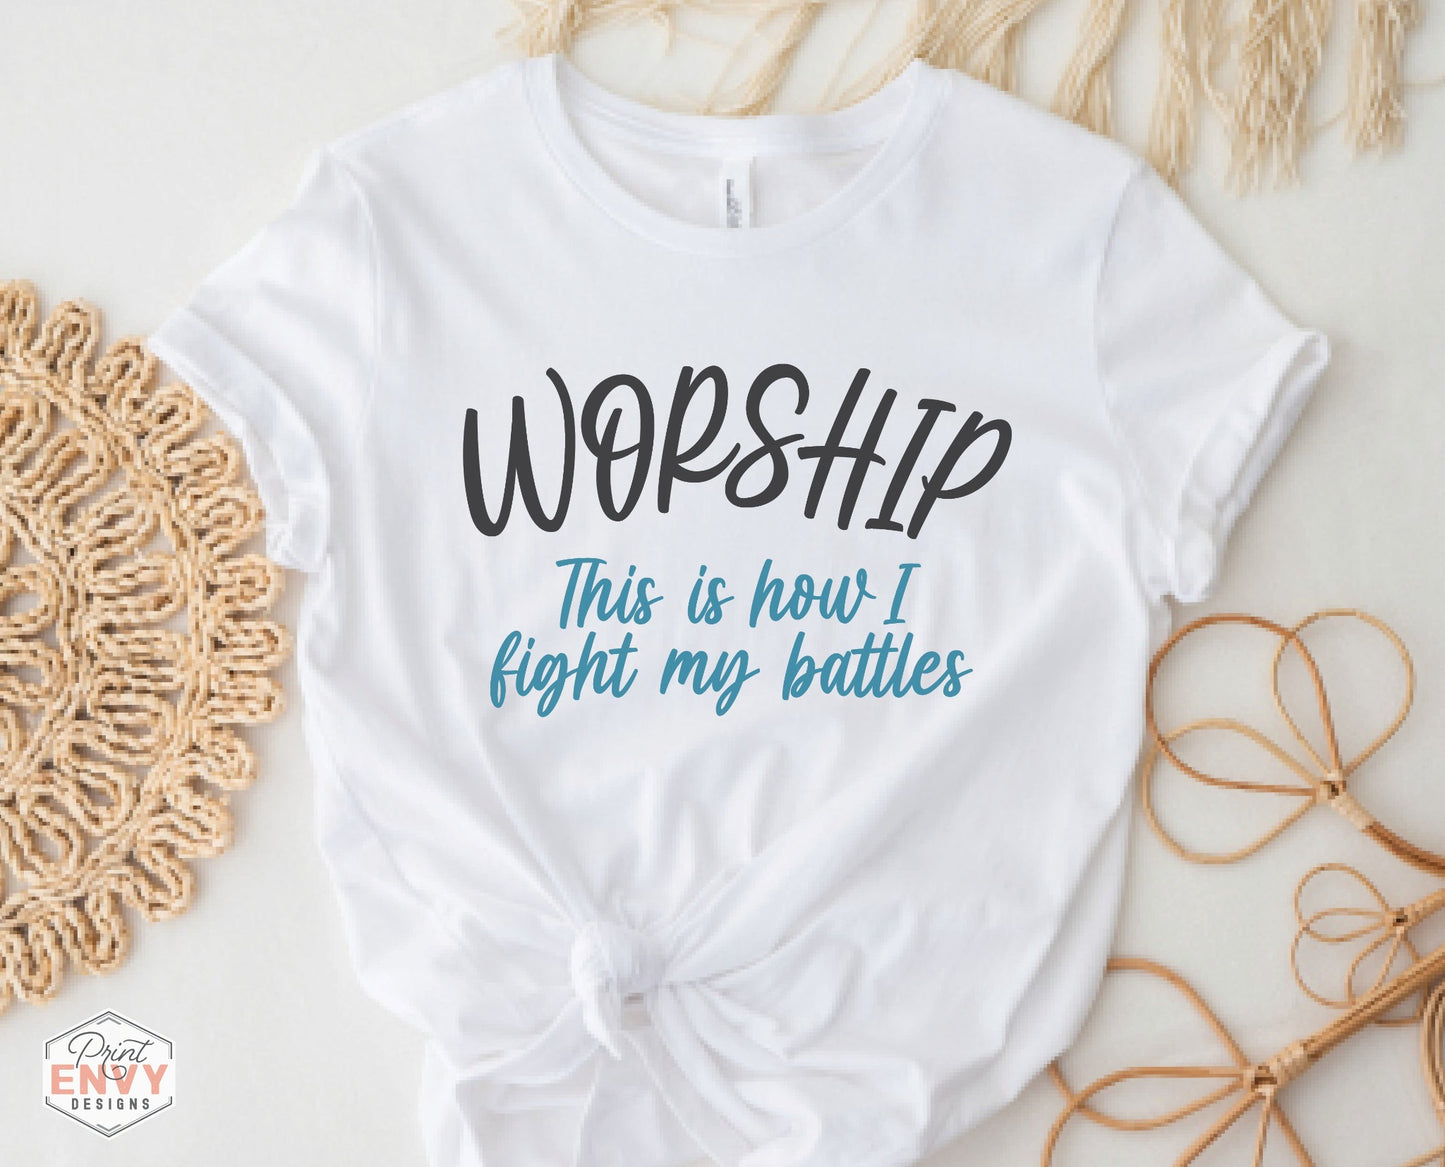 Worship This Is How I Fight My Battles Christian aesthetic t-shirt design printed on soft white tee for women, great gift for worship leaders